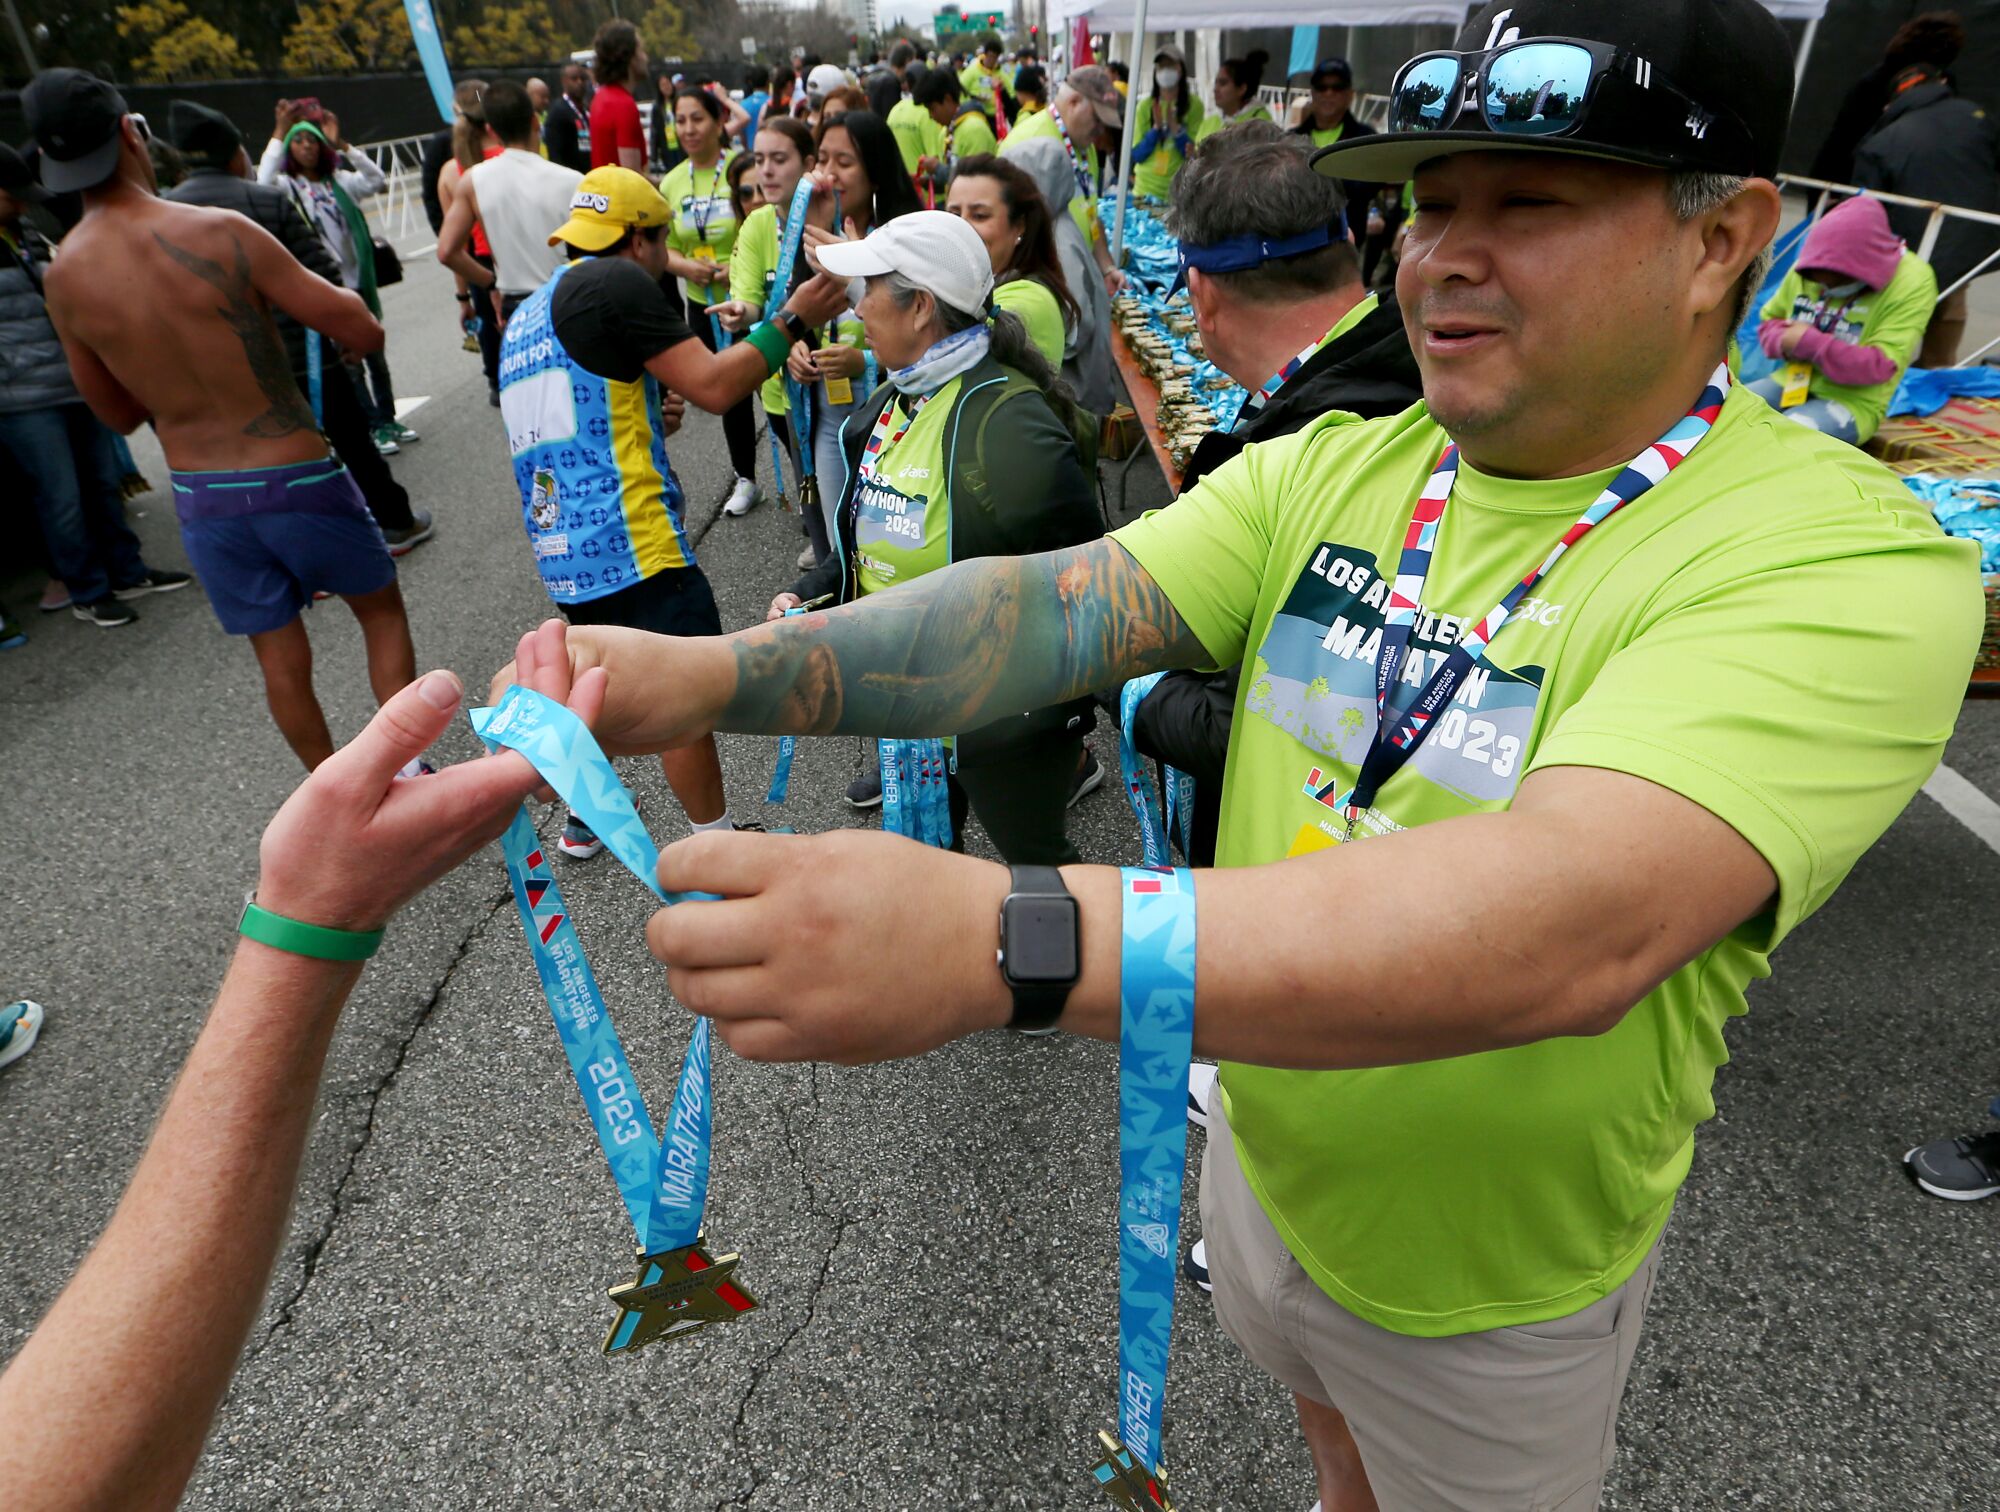 Volunteers hold out award medals to runners for finishing in the Los Angeles Marathon.